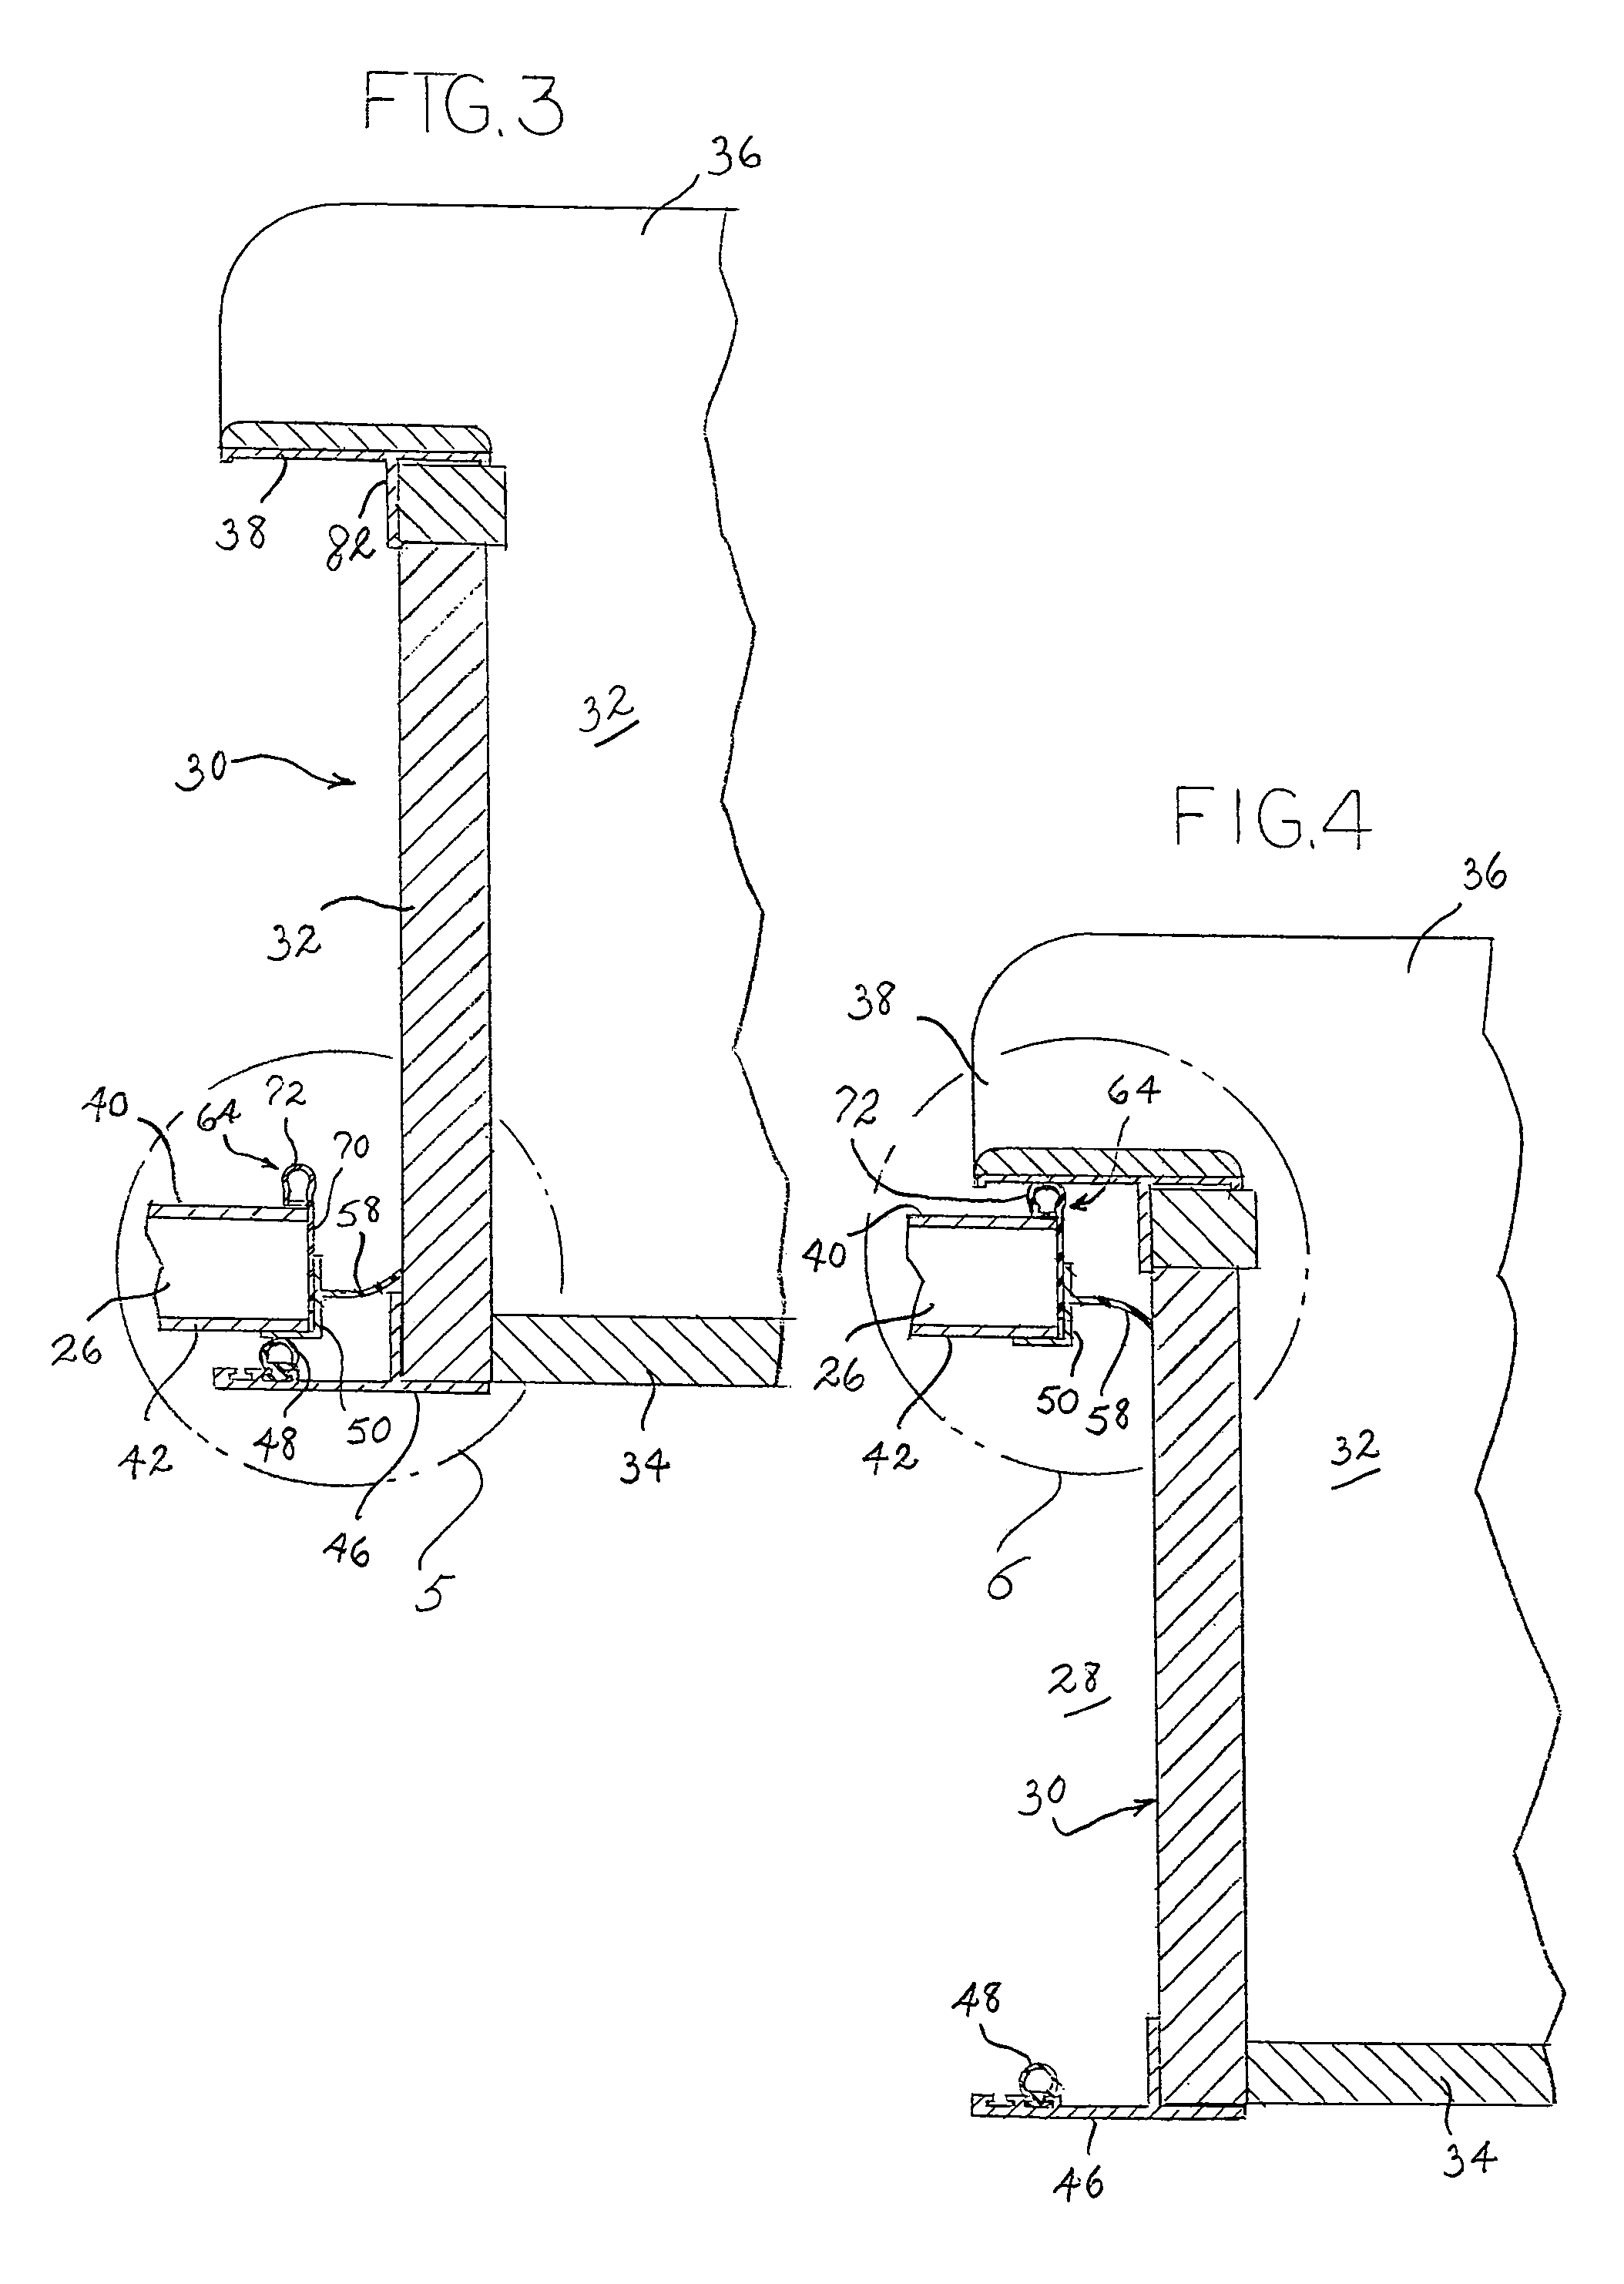 Trim and seal assemblies for vehicle with slide out room and method of manufacture